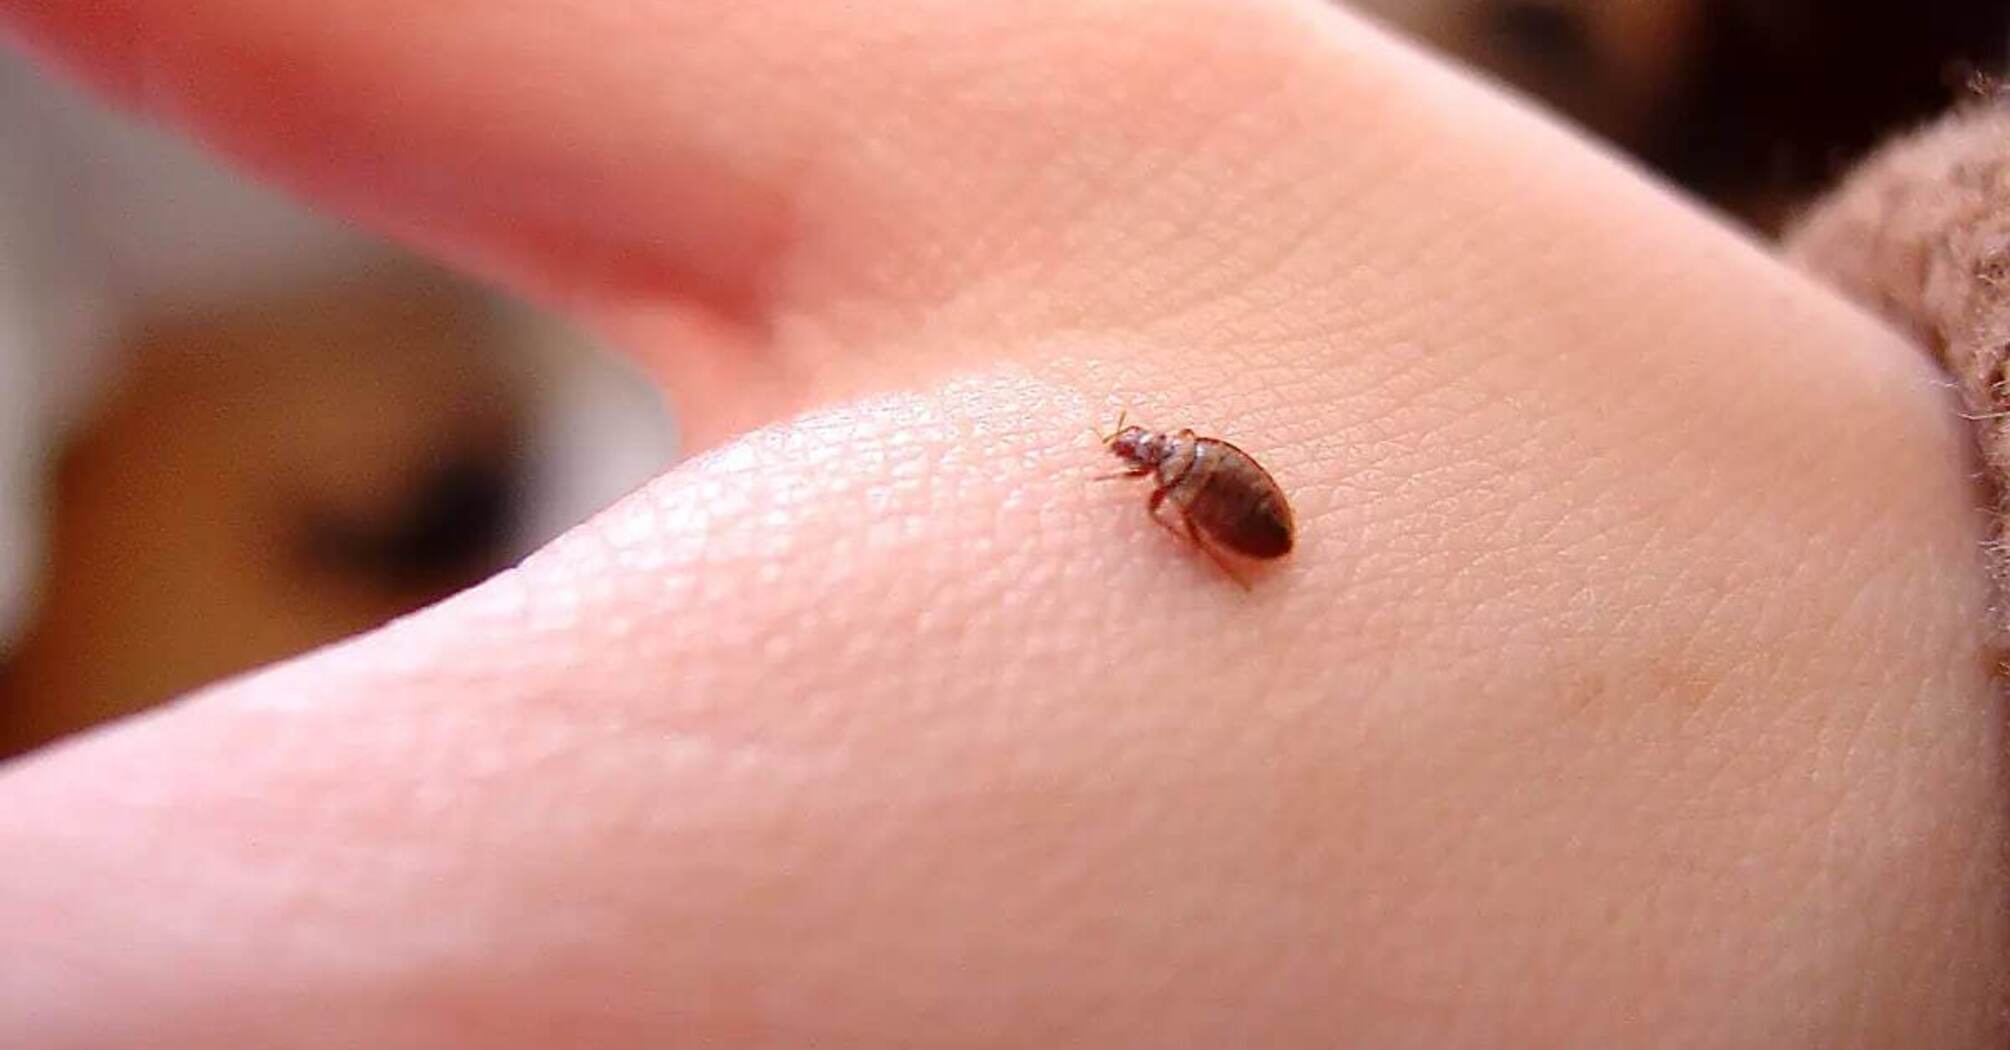 7 non-obvious places where bed bugs can live